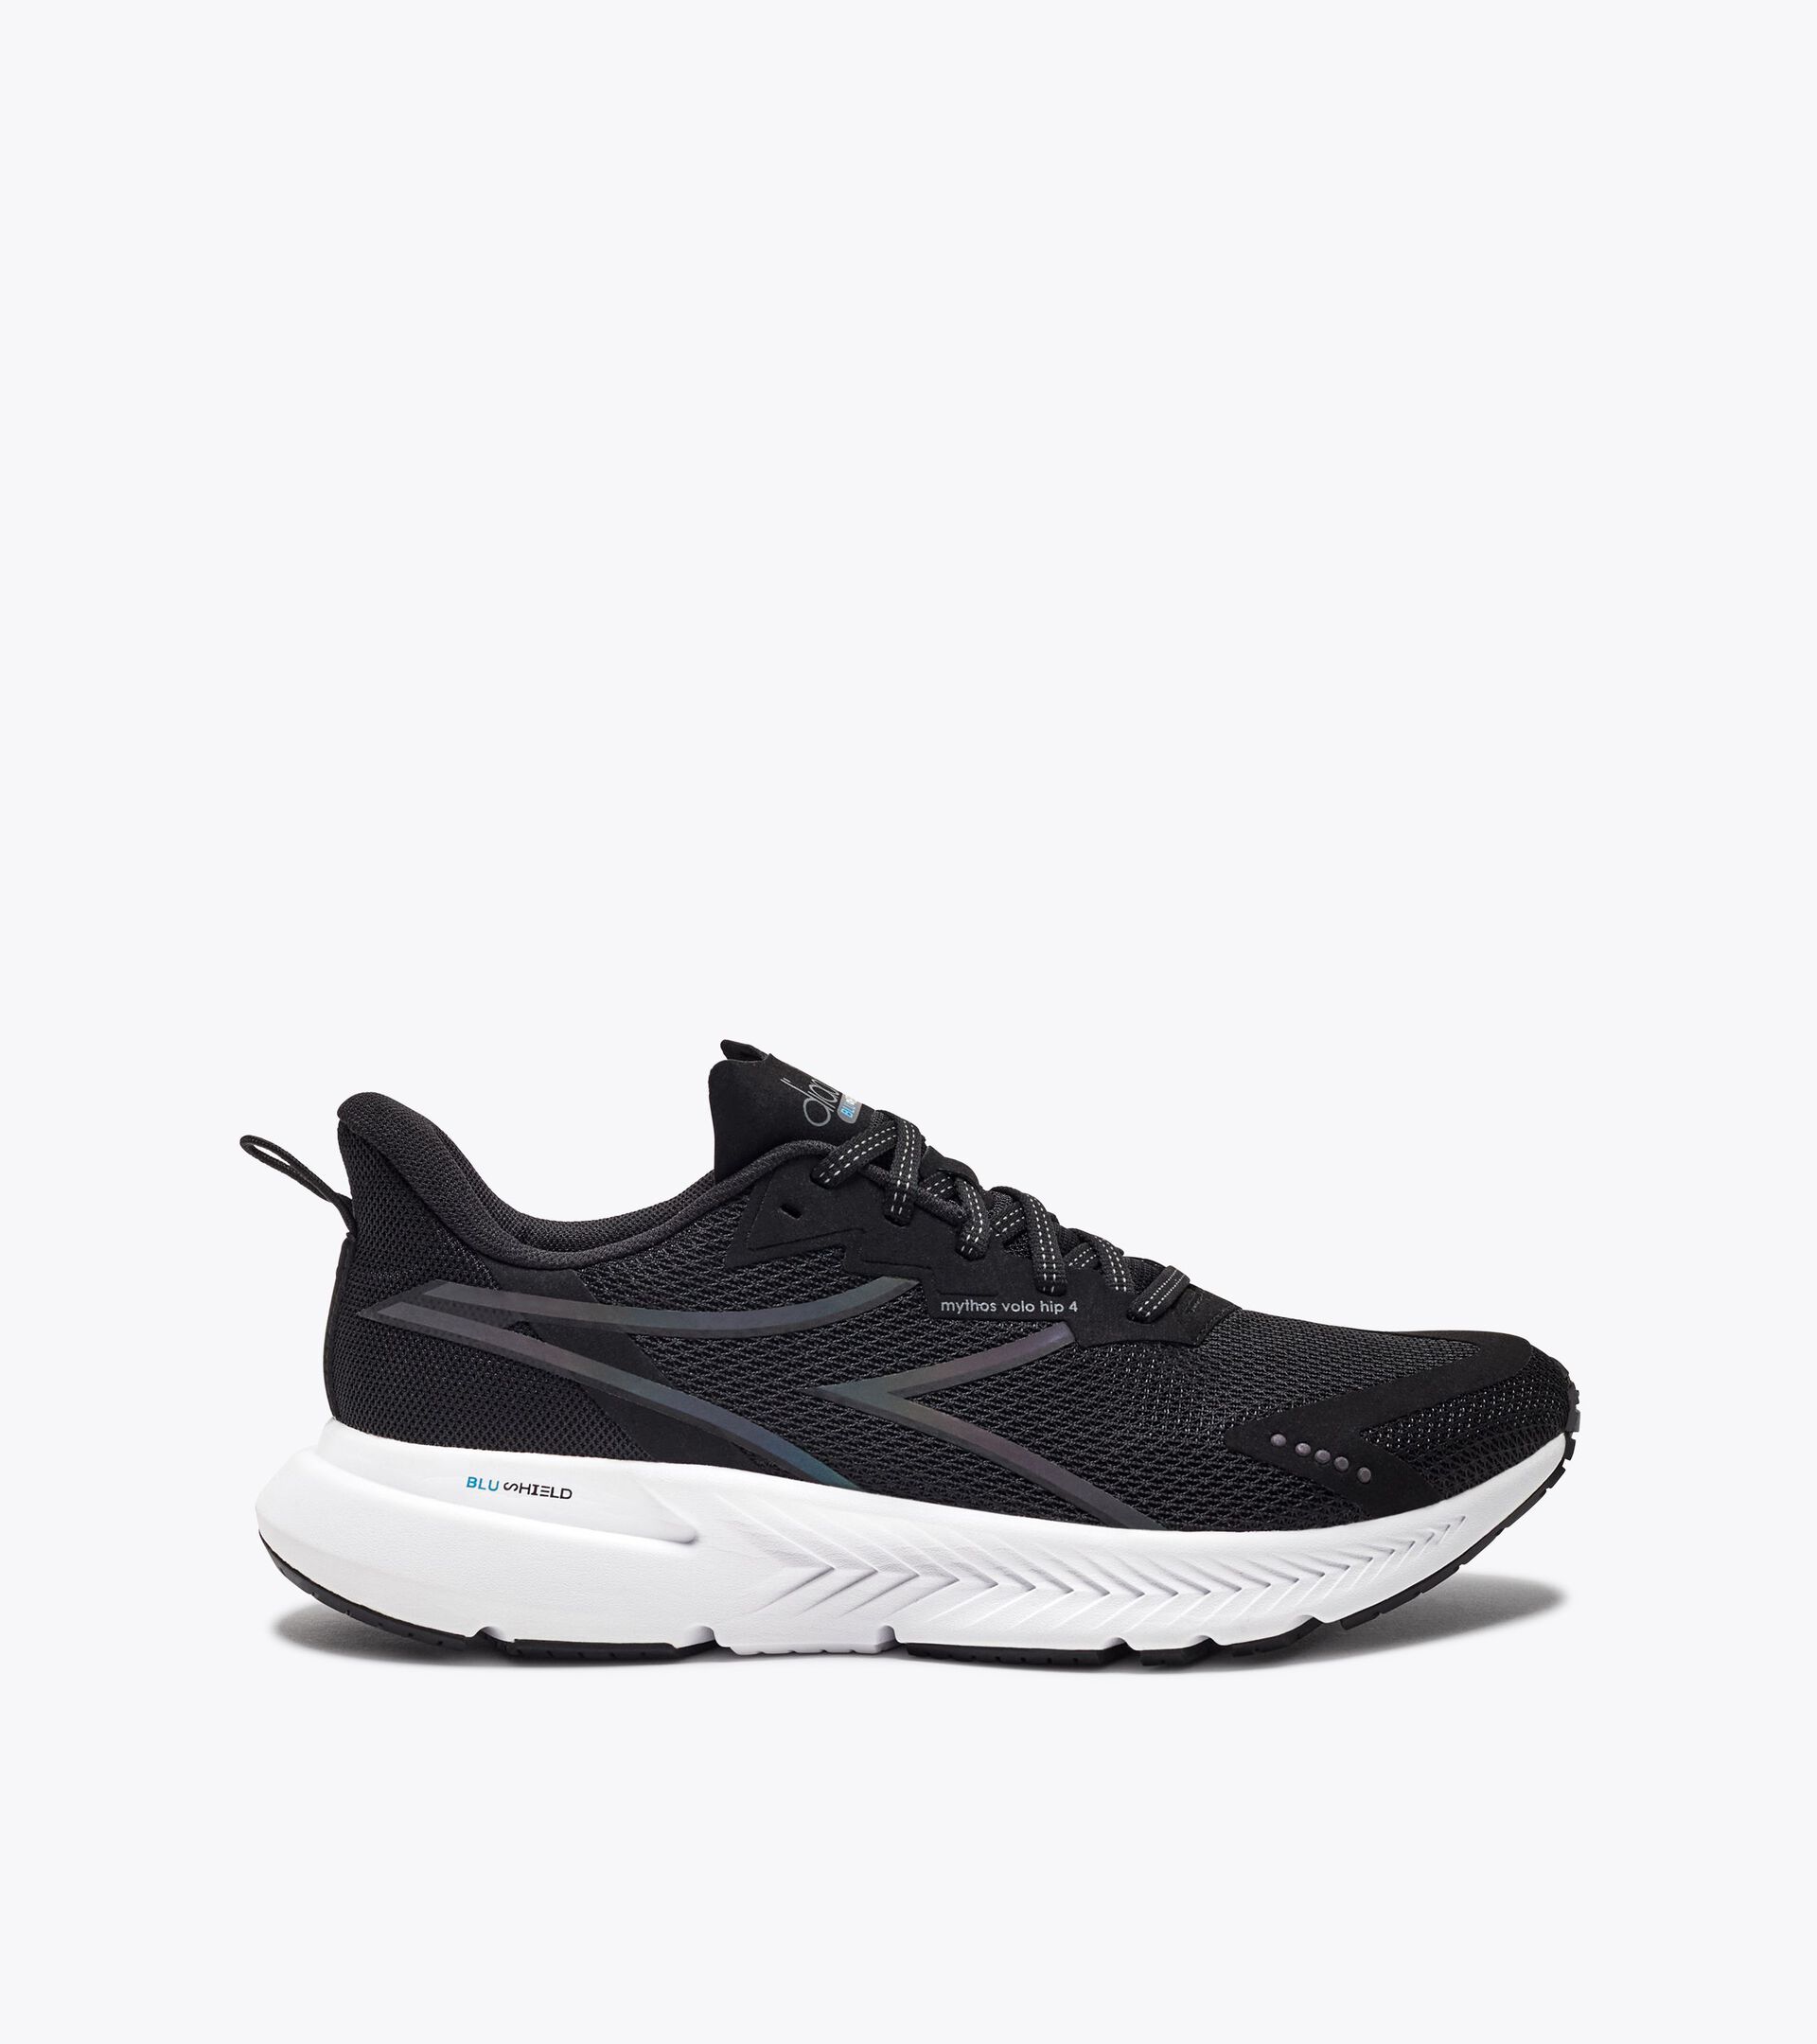 Running shoe with reflective details - Stability and lightness - Men’s
 MYTHOS BLUSHIELD VOLO 4 HIP BLACK/WHITE (C7406) - Diadora